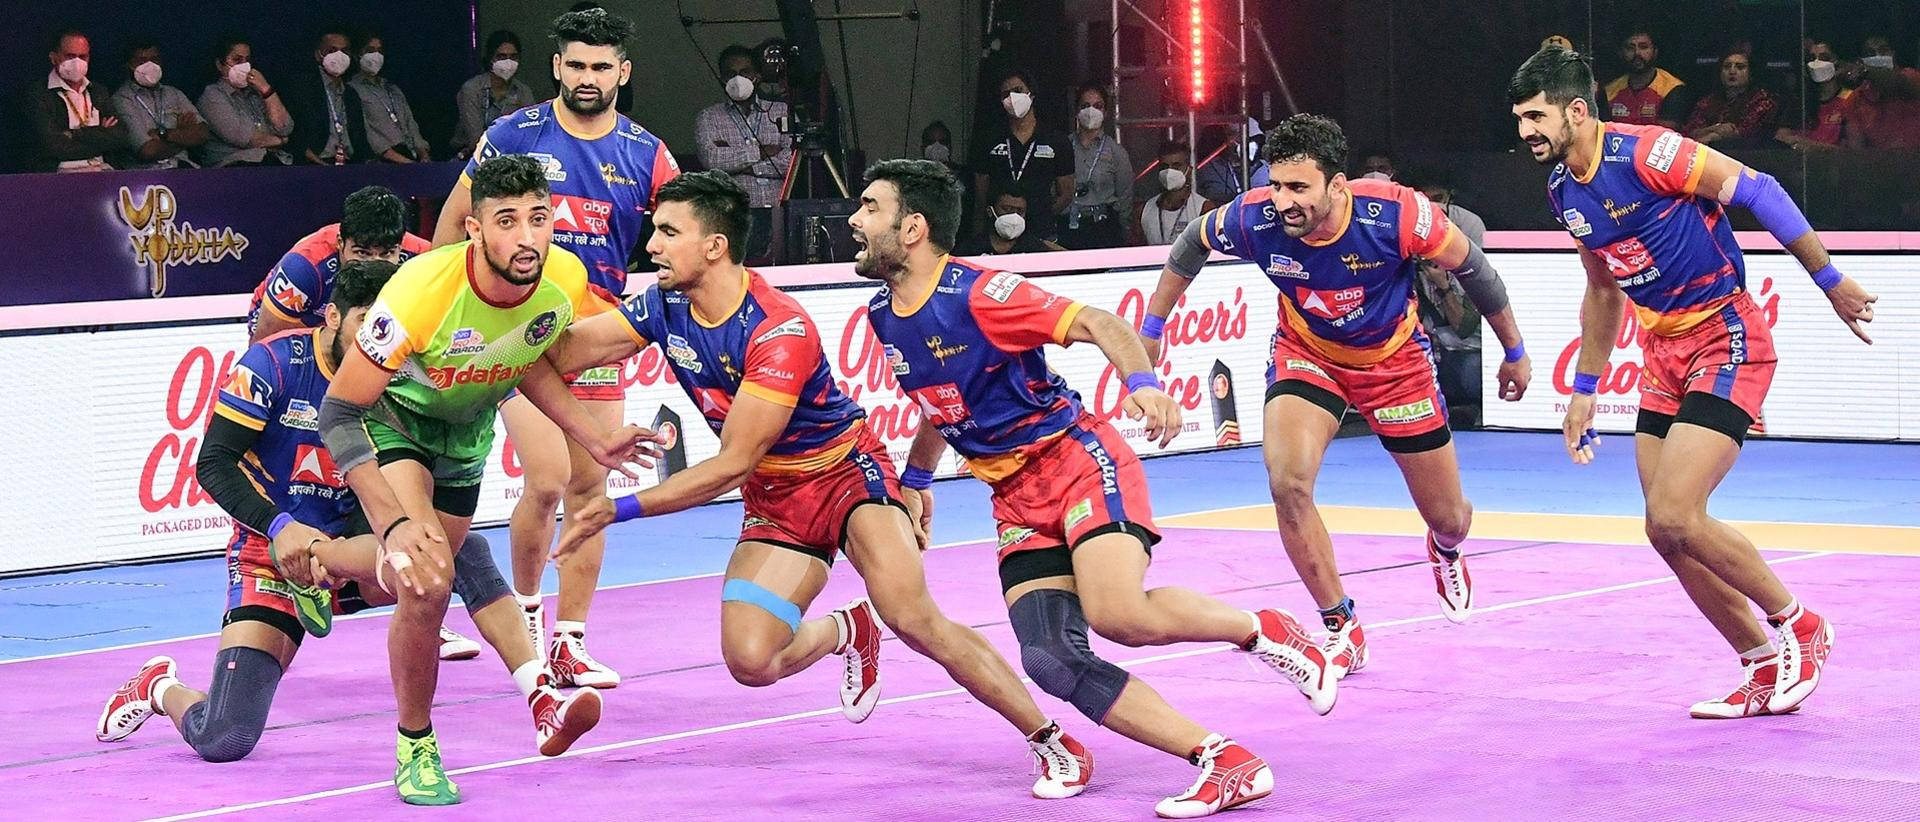 Jogopkl Kabaddi - This Would Be A Good Computer Or Mobile Wallpaper For Fans Of Kabaddi. Papel de Parede